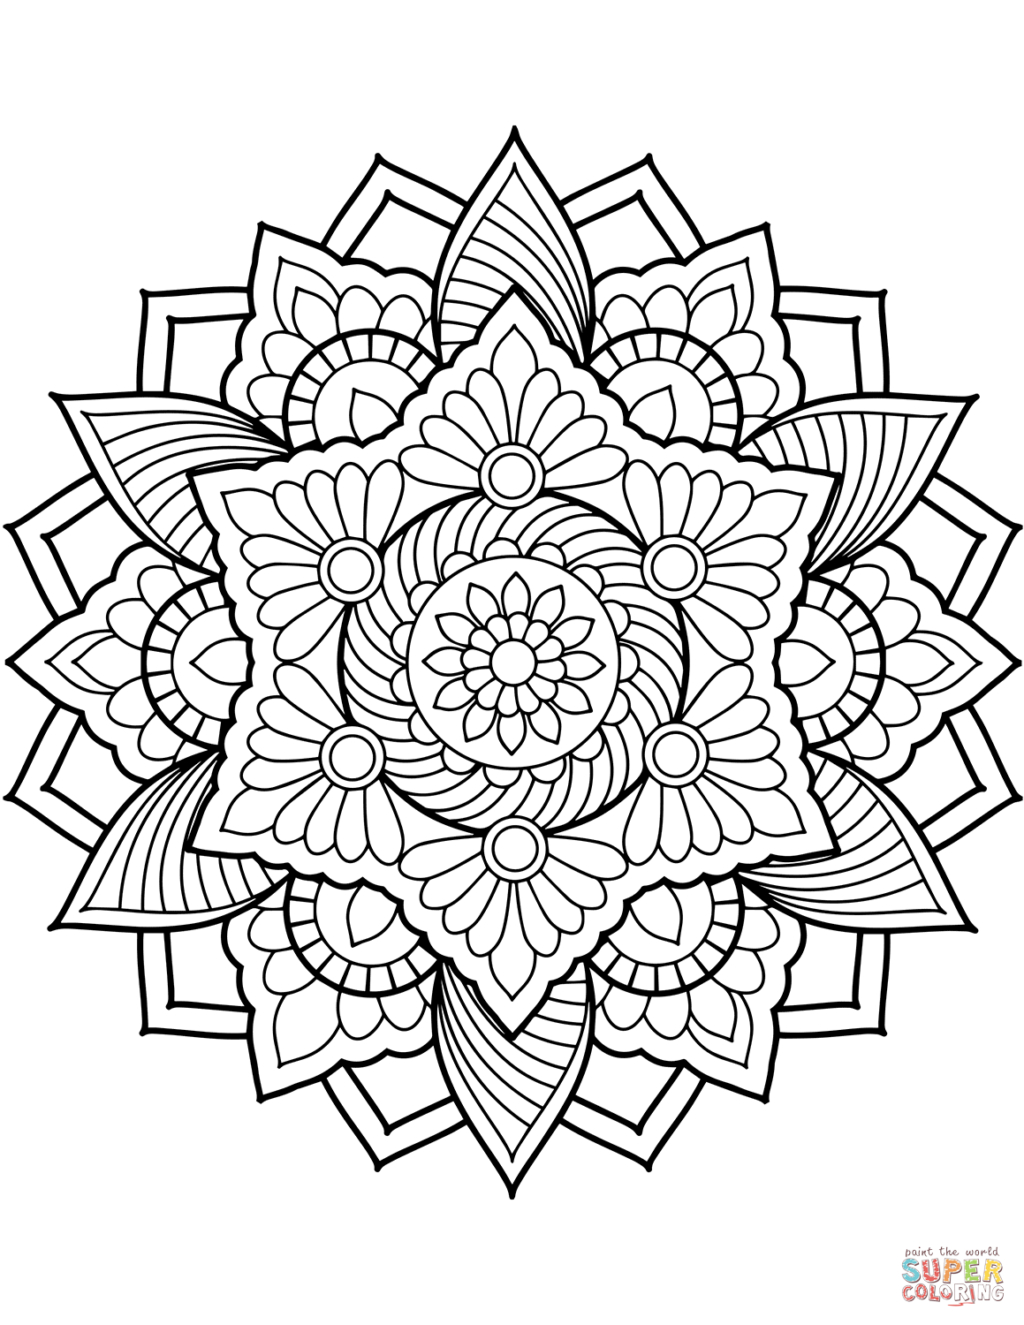 Mandala Coloring Pages For Adults Coloring Page 30 Flower Mandala Coloring Pages Image Inspirations